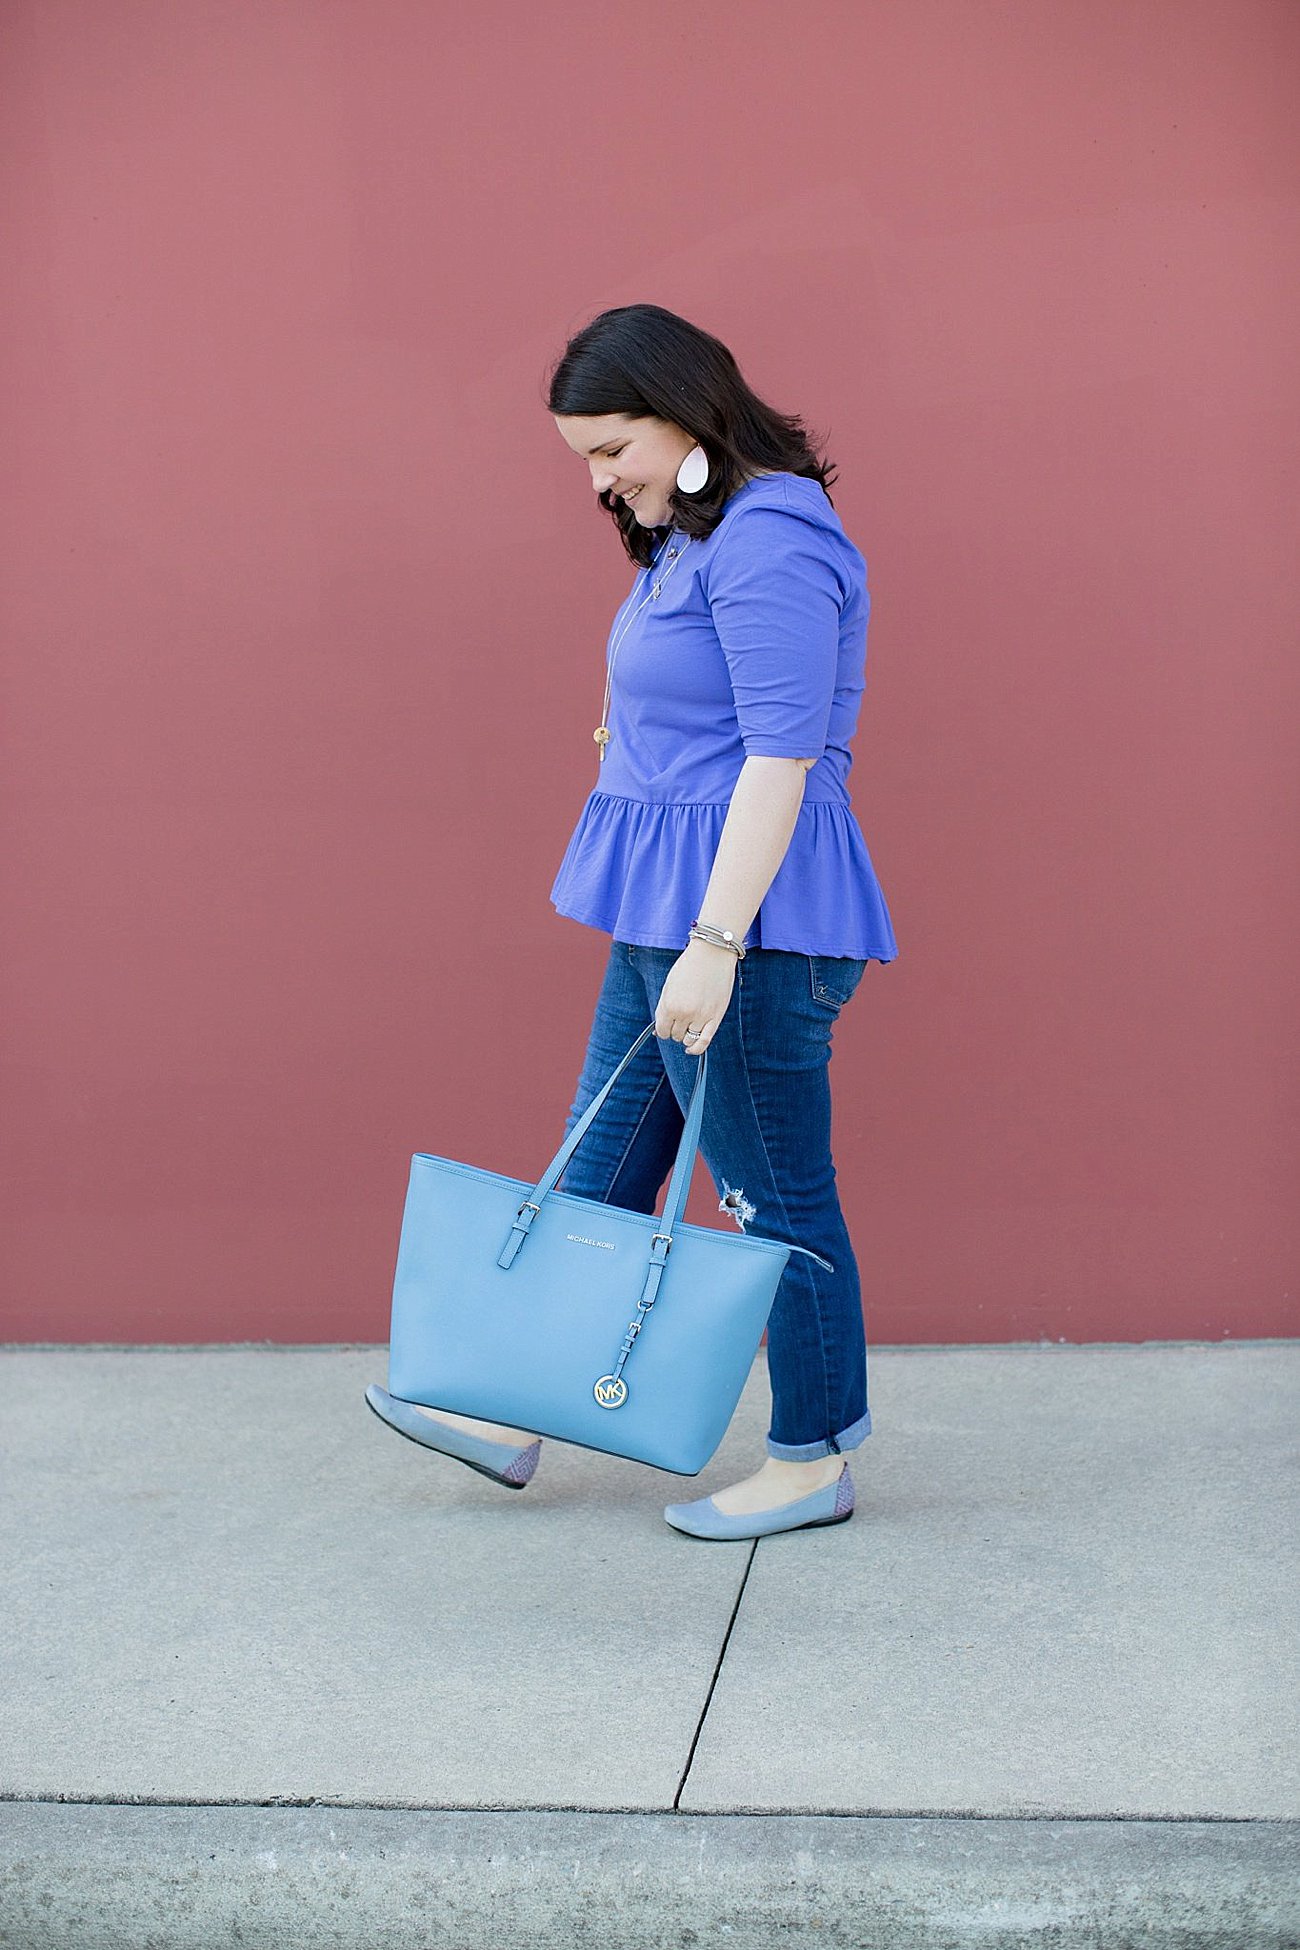 Elegantees Rebecca Top, The Flourish Market, Kut from the Kloth Kate Distressed Boyfriend Jean, The Root Collective Gaby Ballet Flat, Nickel and Suede earrings, Michael Kors tote | Mom Style | North Carolina Fashion & Style Blogger (8) (4)